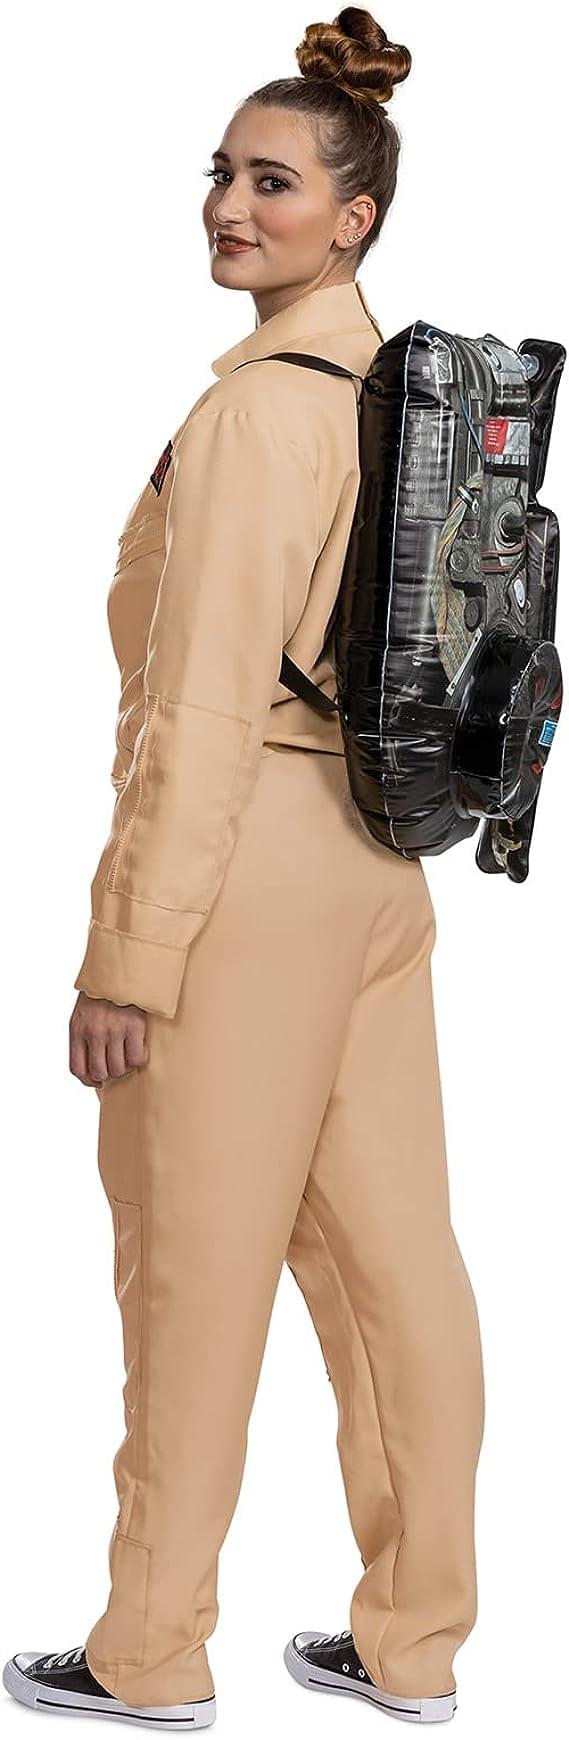 Ghostbusters 80's Deluxe Adult Costume